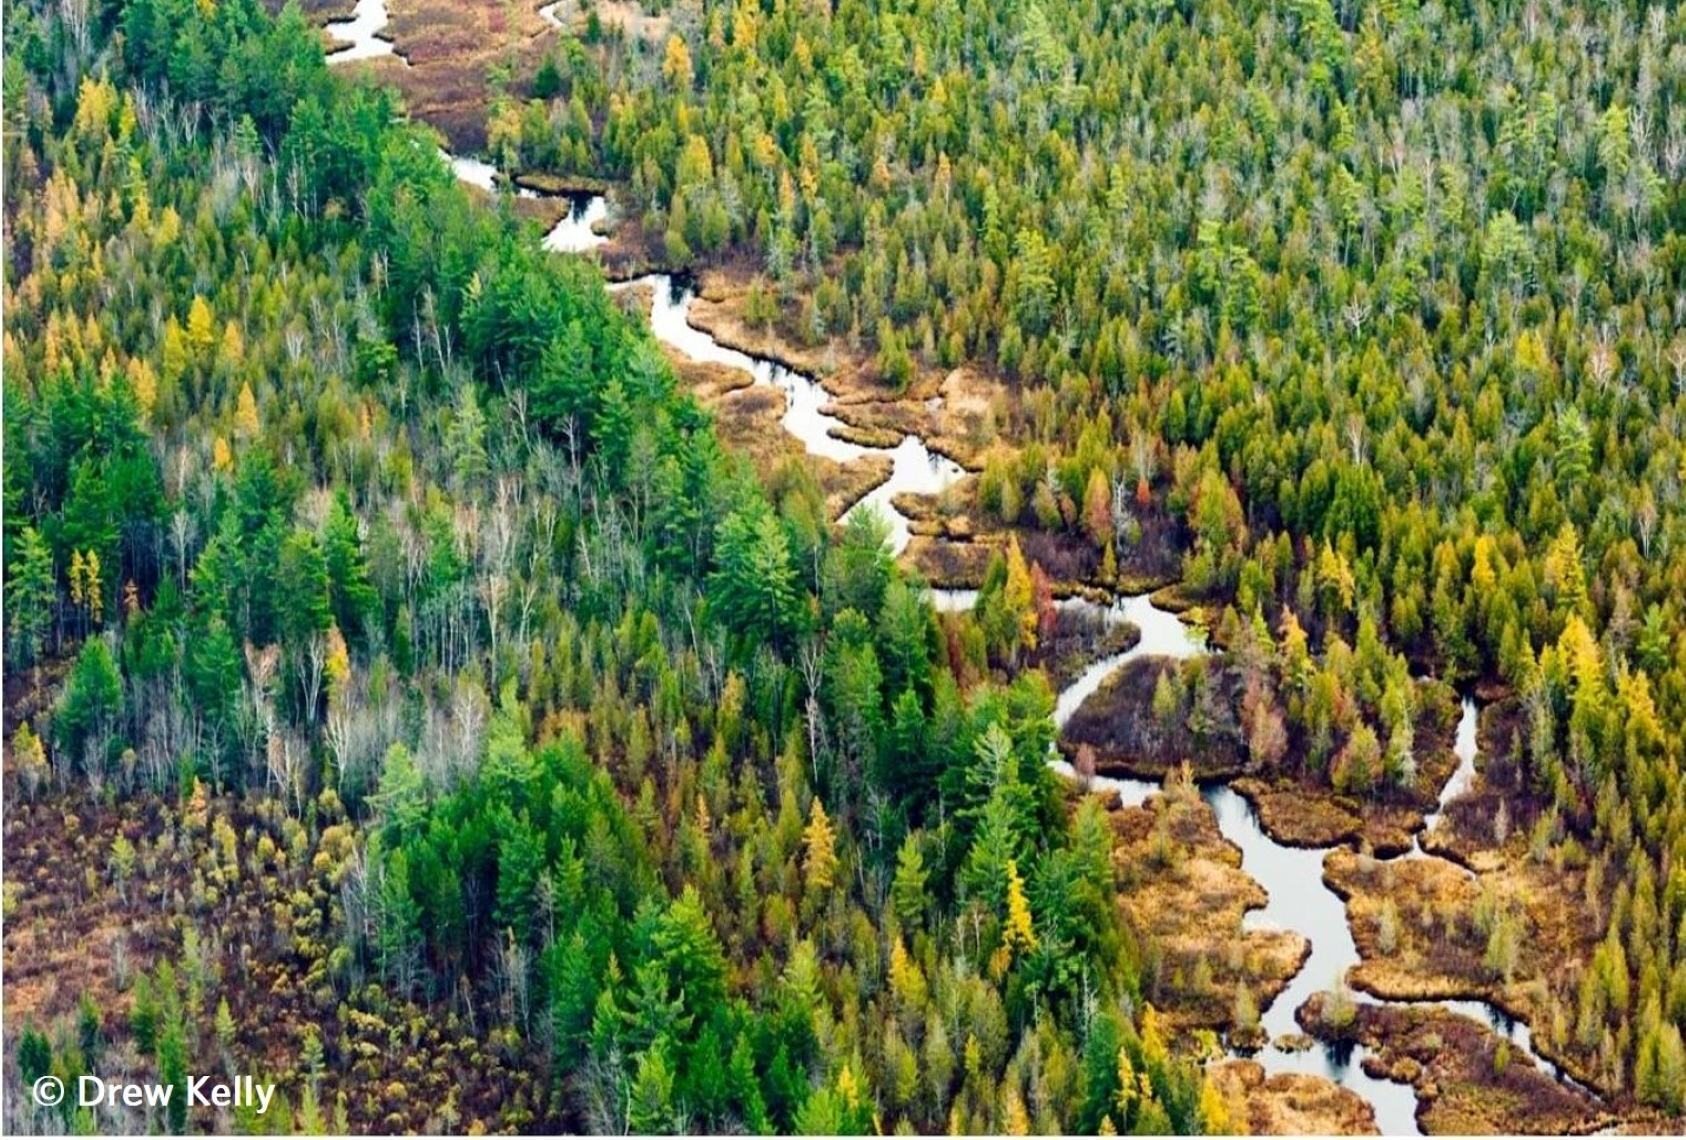 Aerial photo of a river running through a forested landscape. Image copyright Drew Kelly.